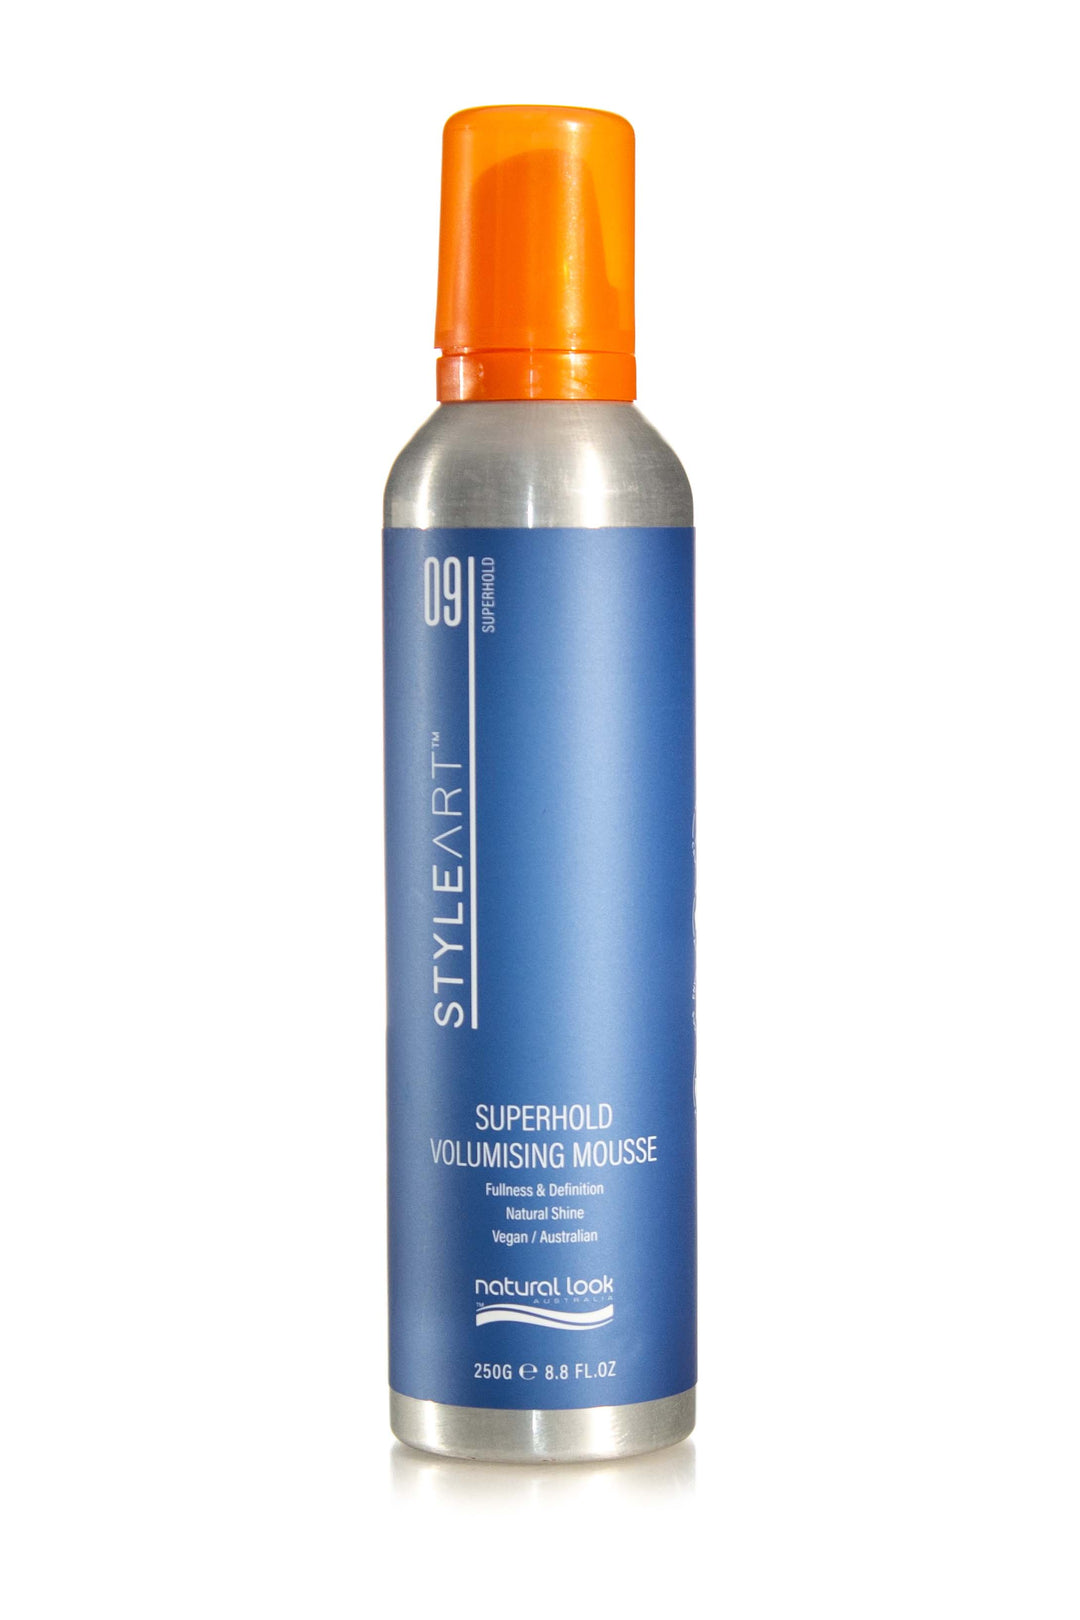 NATURAL LOOK STYLEART SUPERHOLD VOLUMISING MOUSSE 250G